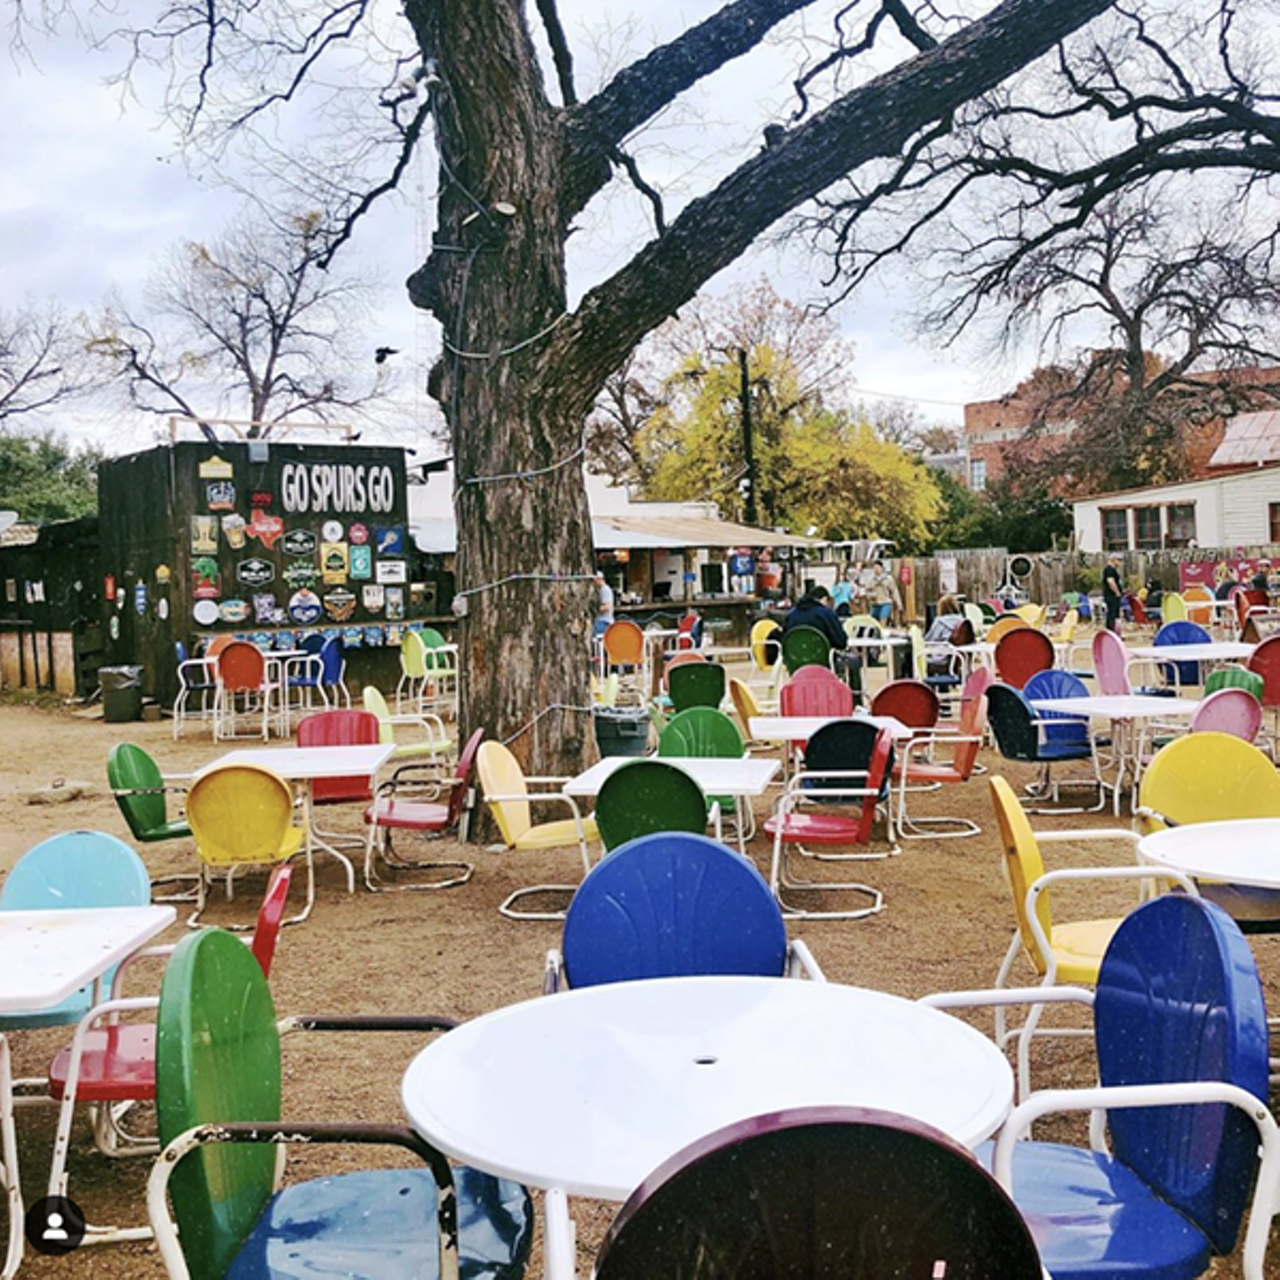 The Friendly Spot Ice House
943 S Alamo St., (210) 224-2337, thefriendlyspot.com
Southtown’s largest outdoor food and drink venue, The Friendly Spot, has reopened its yard seating, bringing back outdoor sports viewing and weekend DJ sets. 
Photo via Instagram /  
lizzie.blank